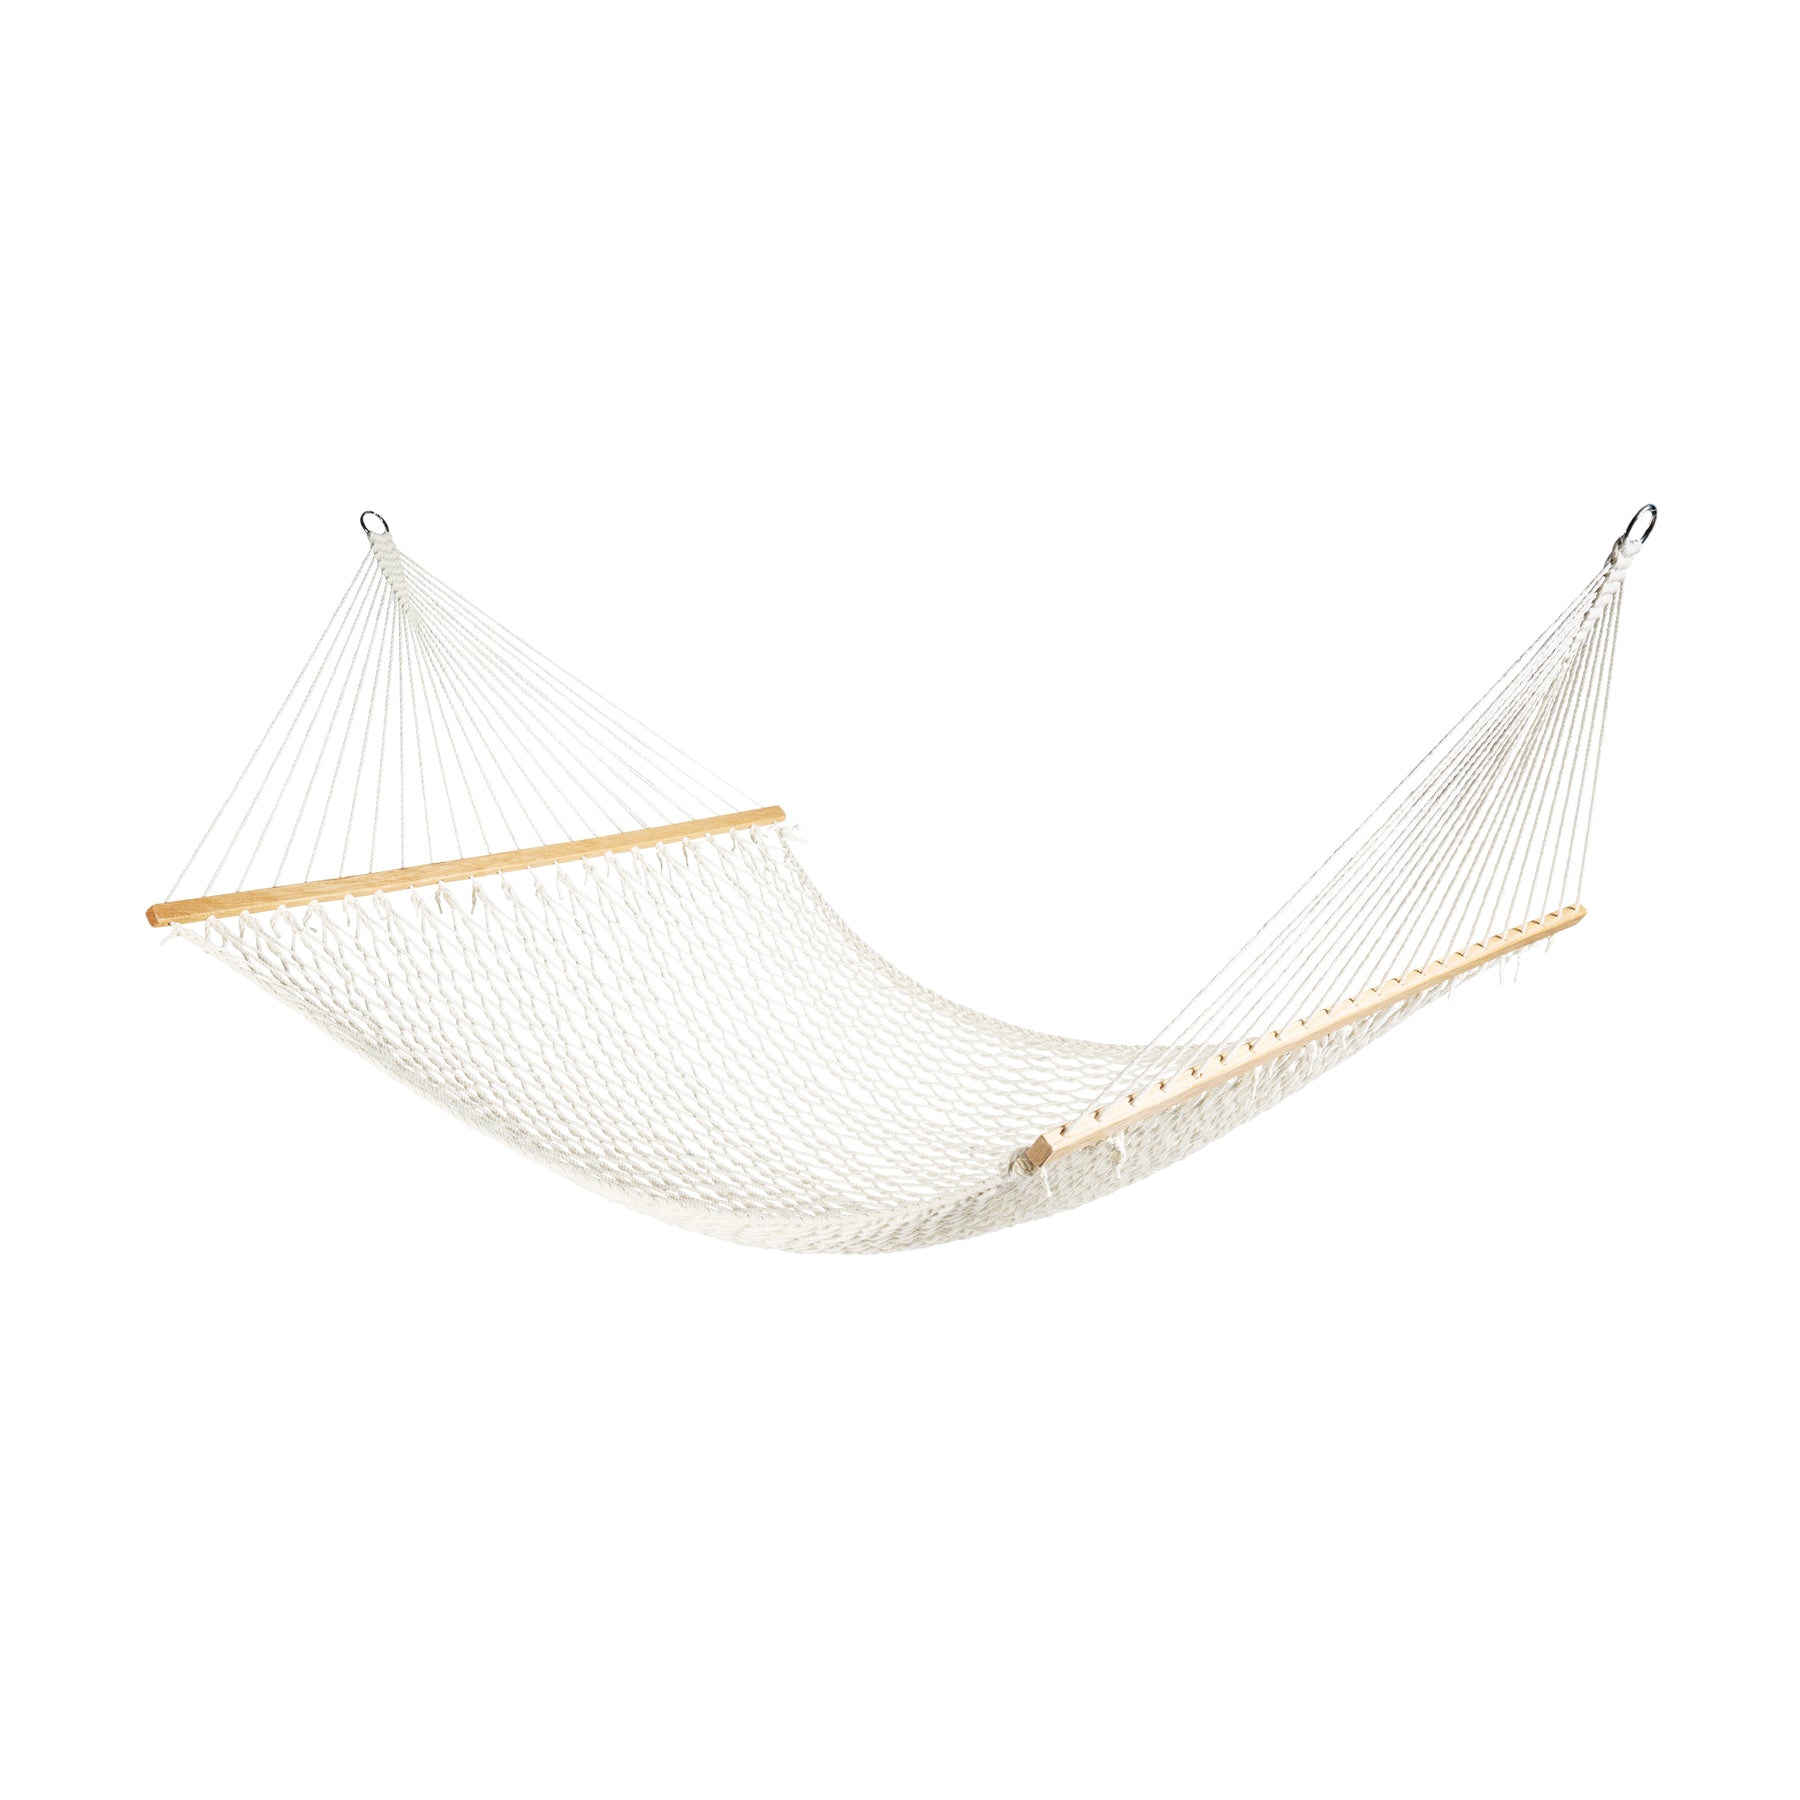 Angled view of the Bliss Hammocks 60-inch Wide Cotton Rope Hammock with Spreader Bar, S Hooks, and Chains in the white variation.